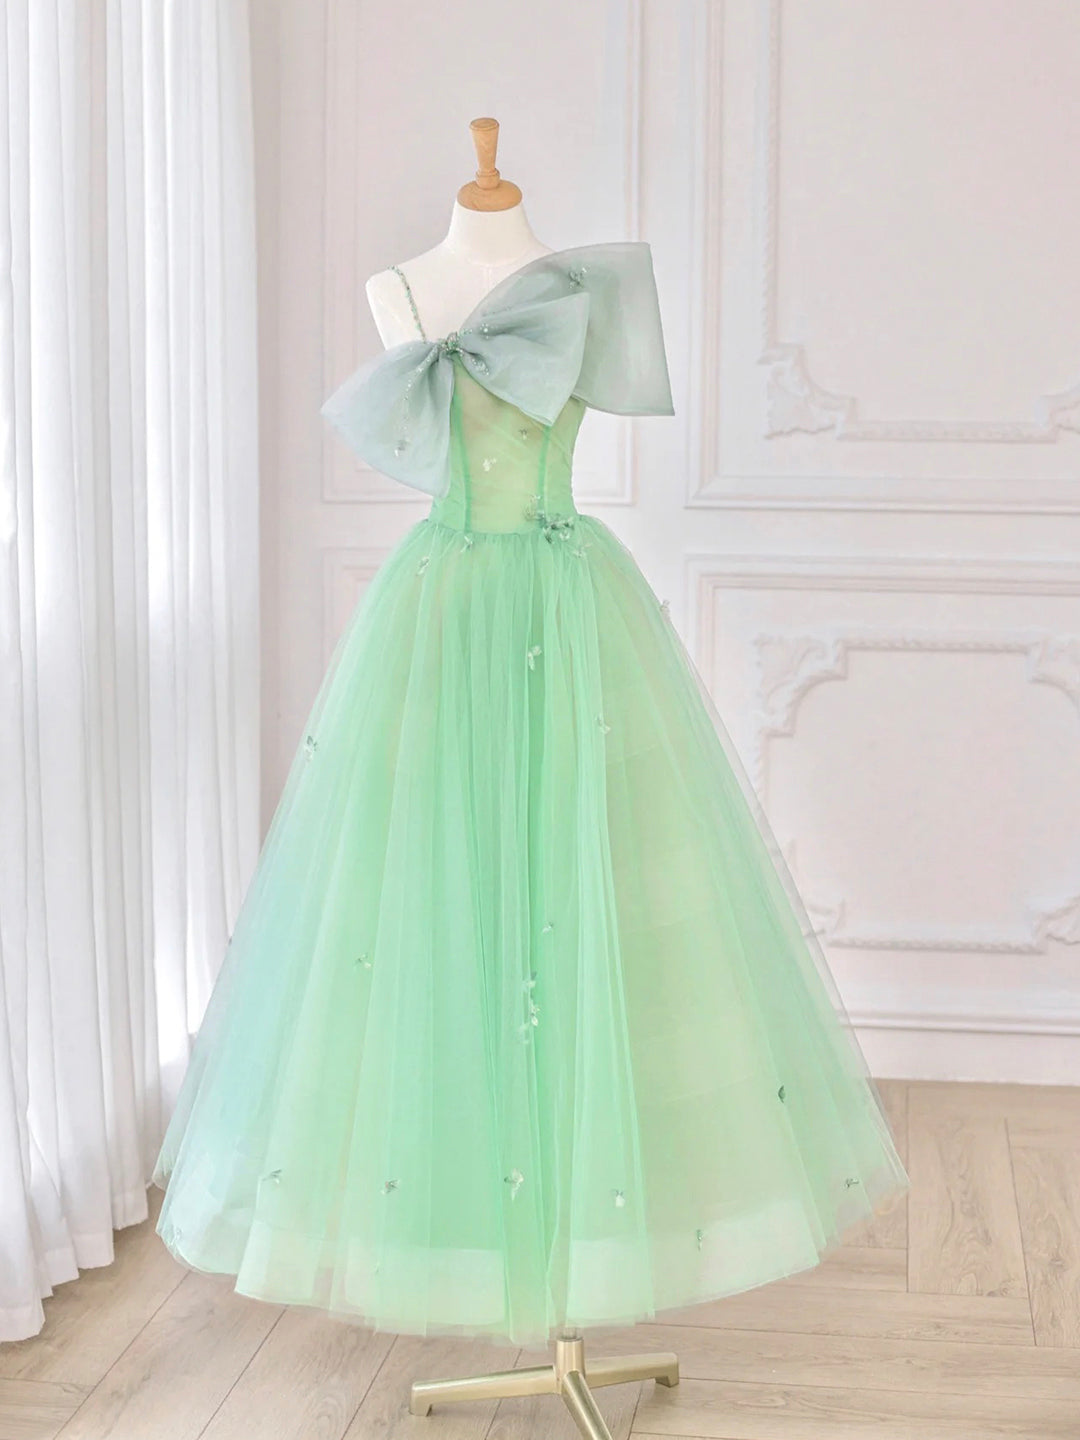 Green Tulle Short Corset Prom Dress, A-Line Evening Dress with Bow outfit, Prom Dress Silk